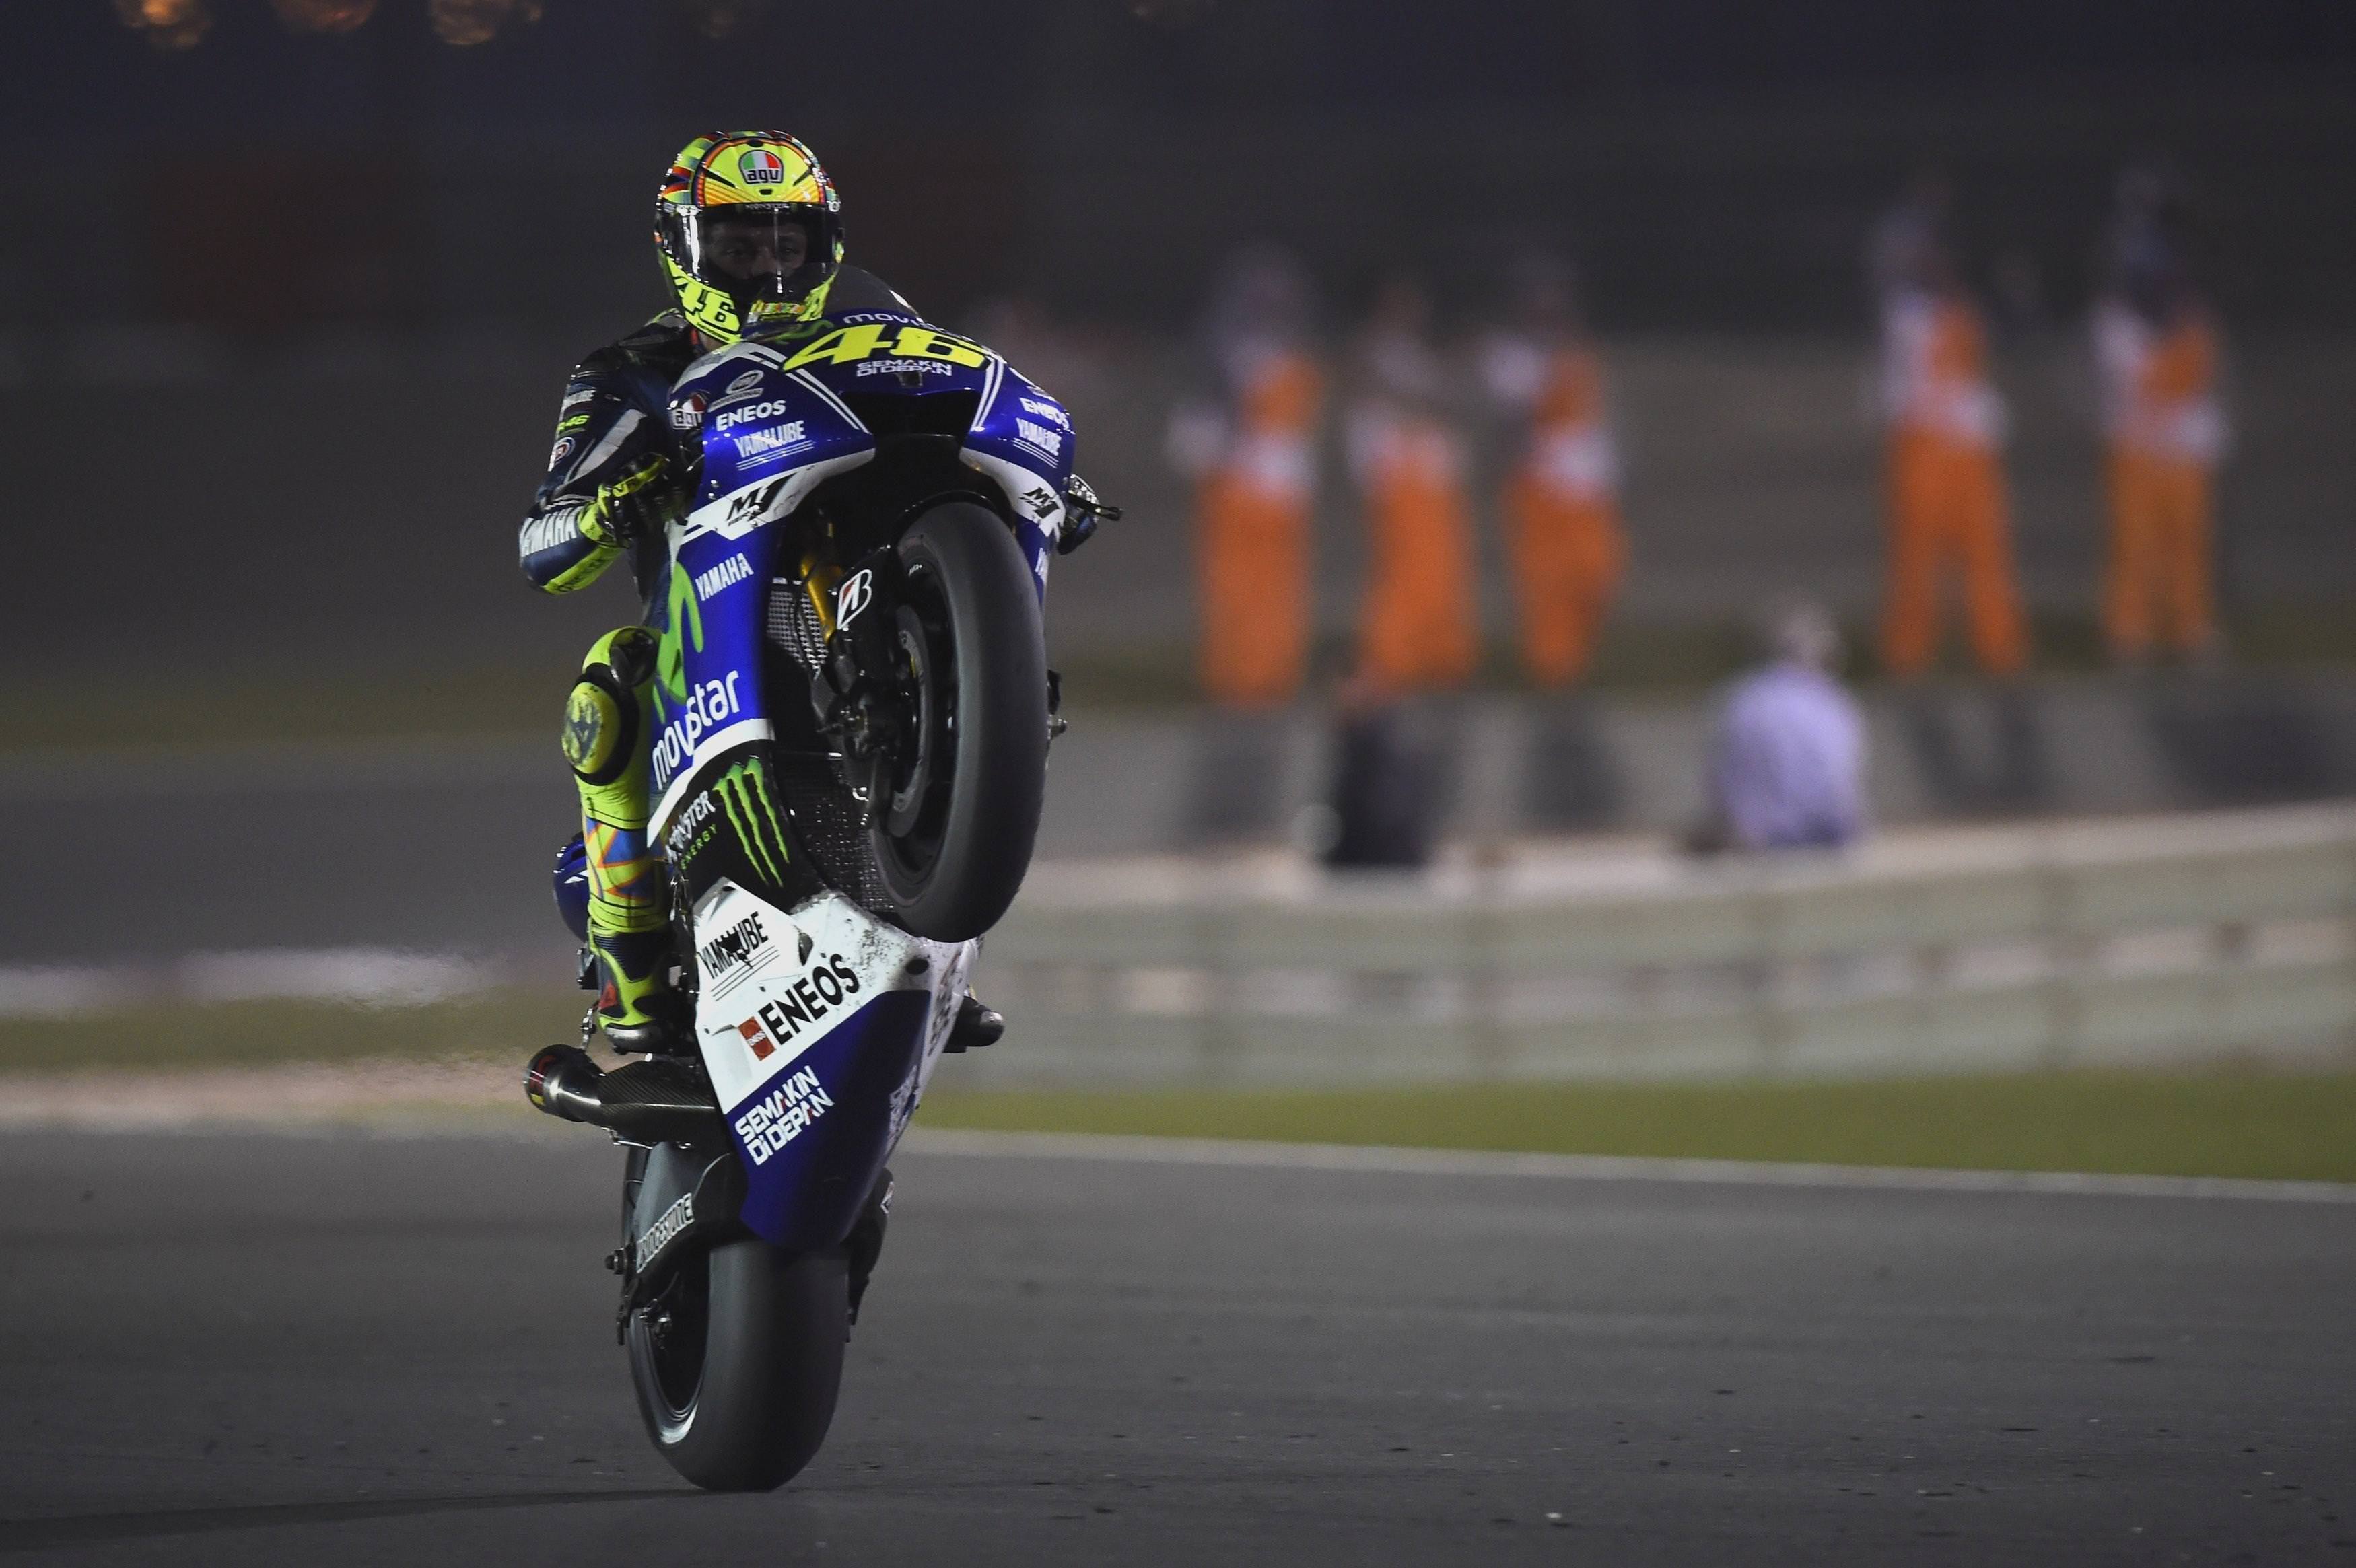 Download VR46 ROSSI WALLPAPER Free for Android - VR46 ROSSI WALLPAPER APK  Download - STEPrimo.com